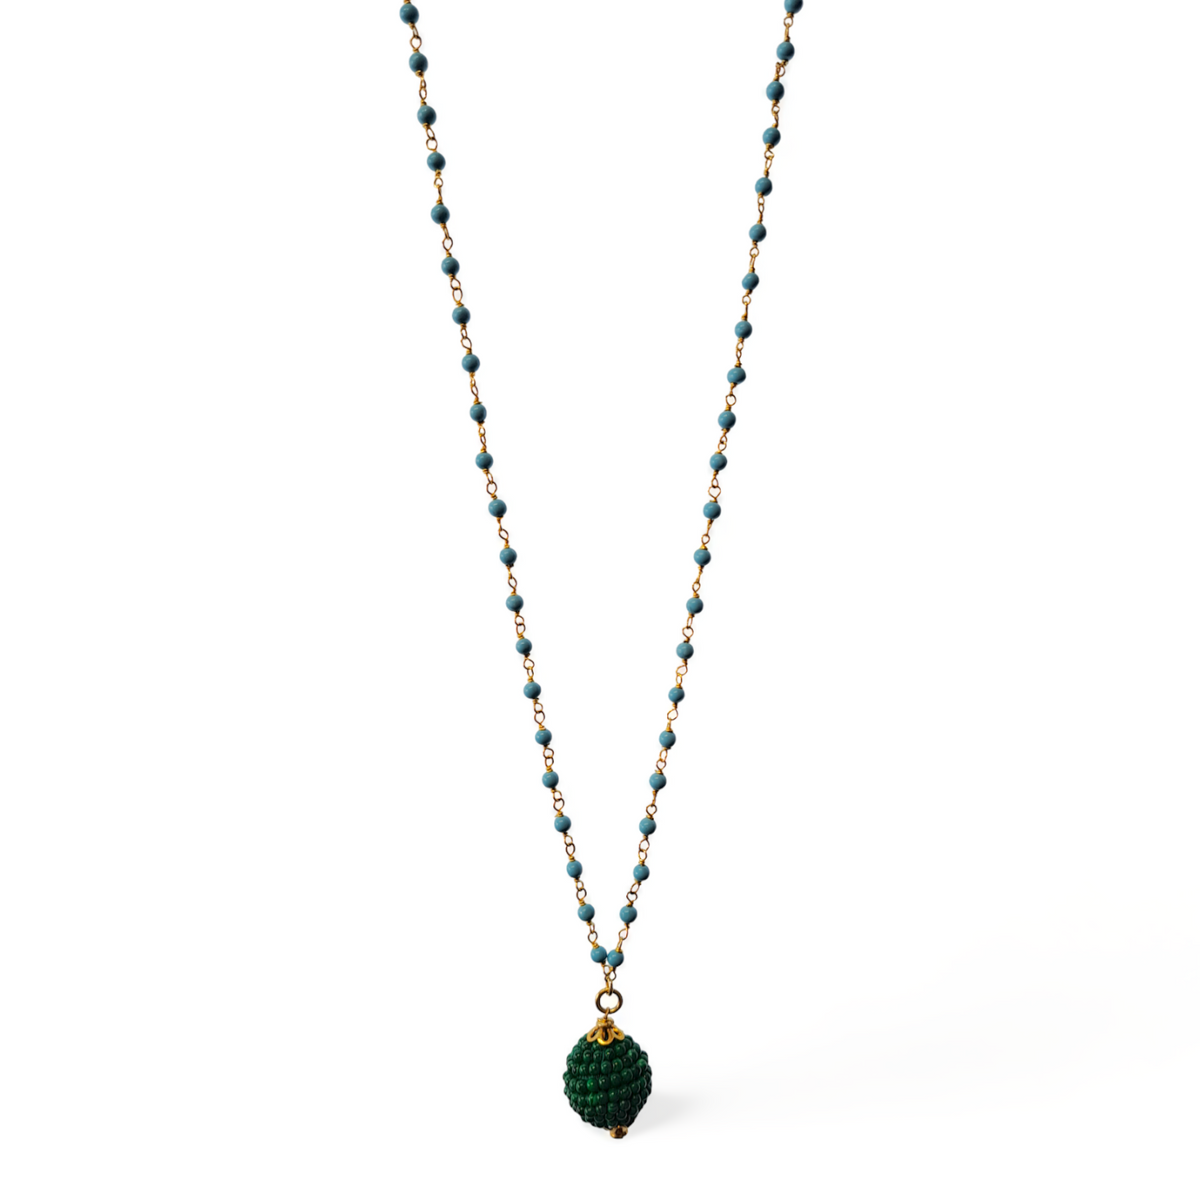 Argentum Drop Necklace - Turquoise &amp; Malahite - Gold Plating 925 Silver